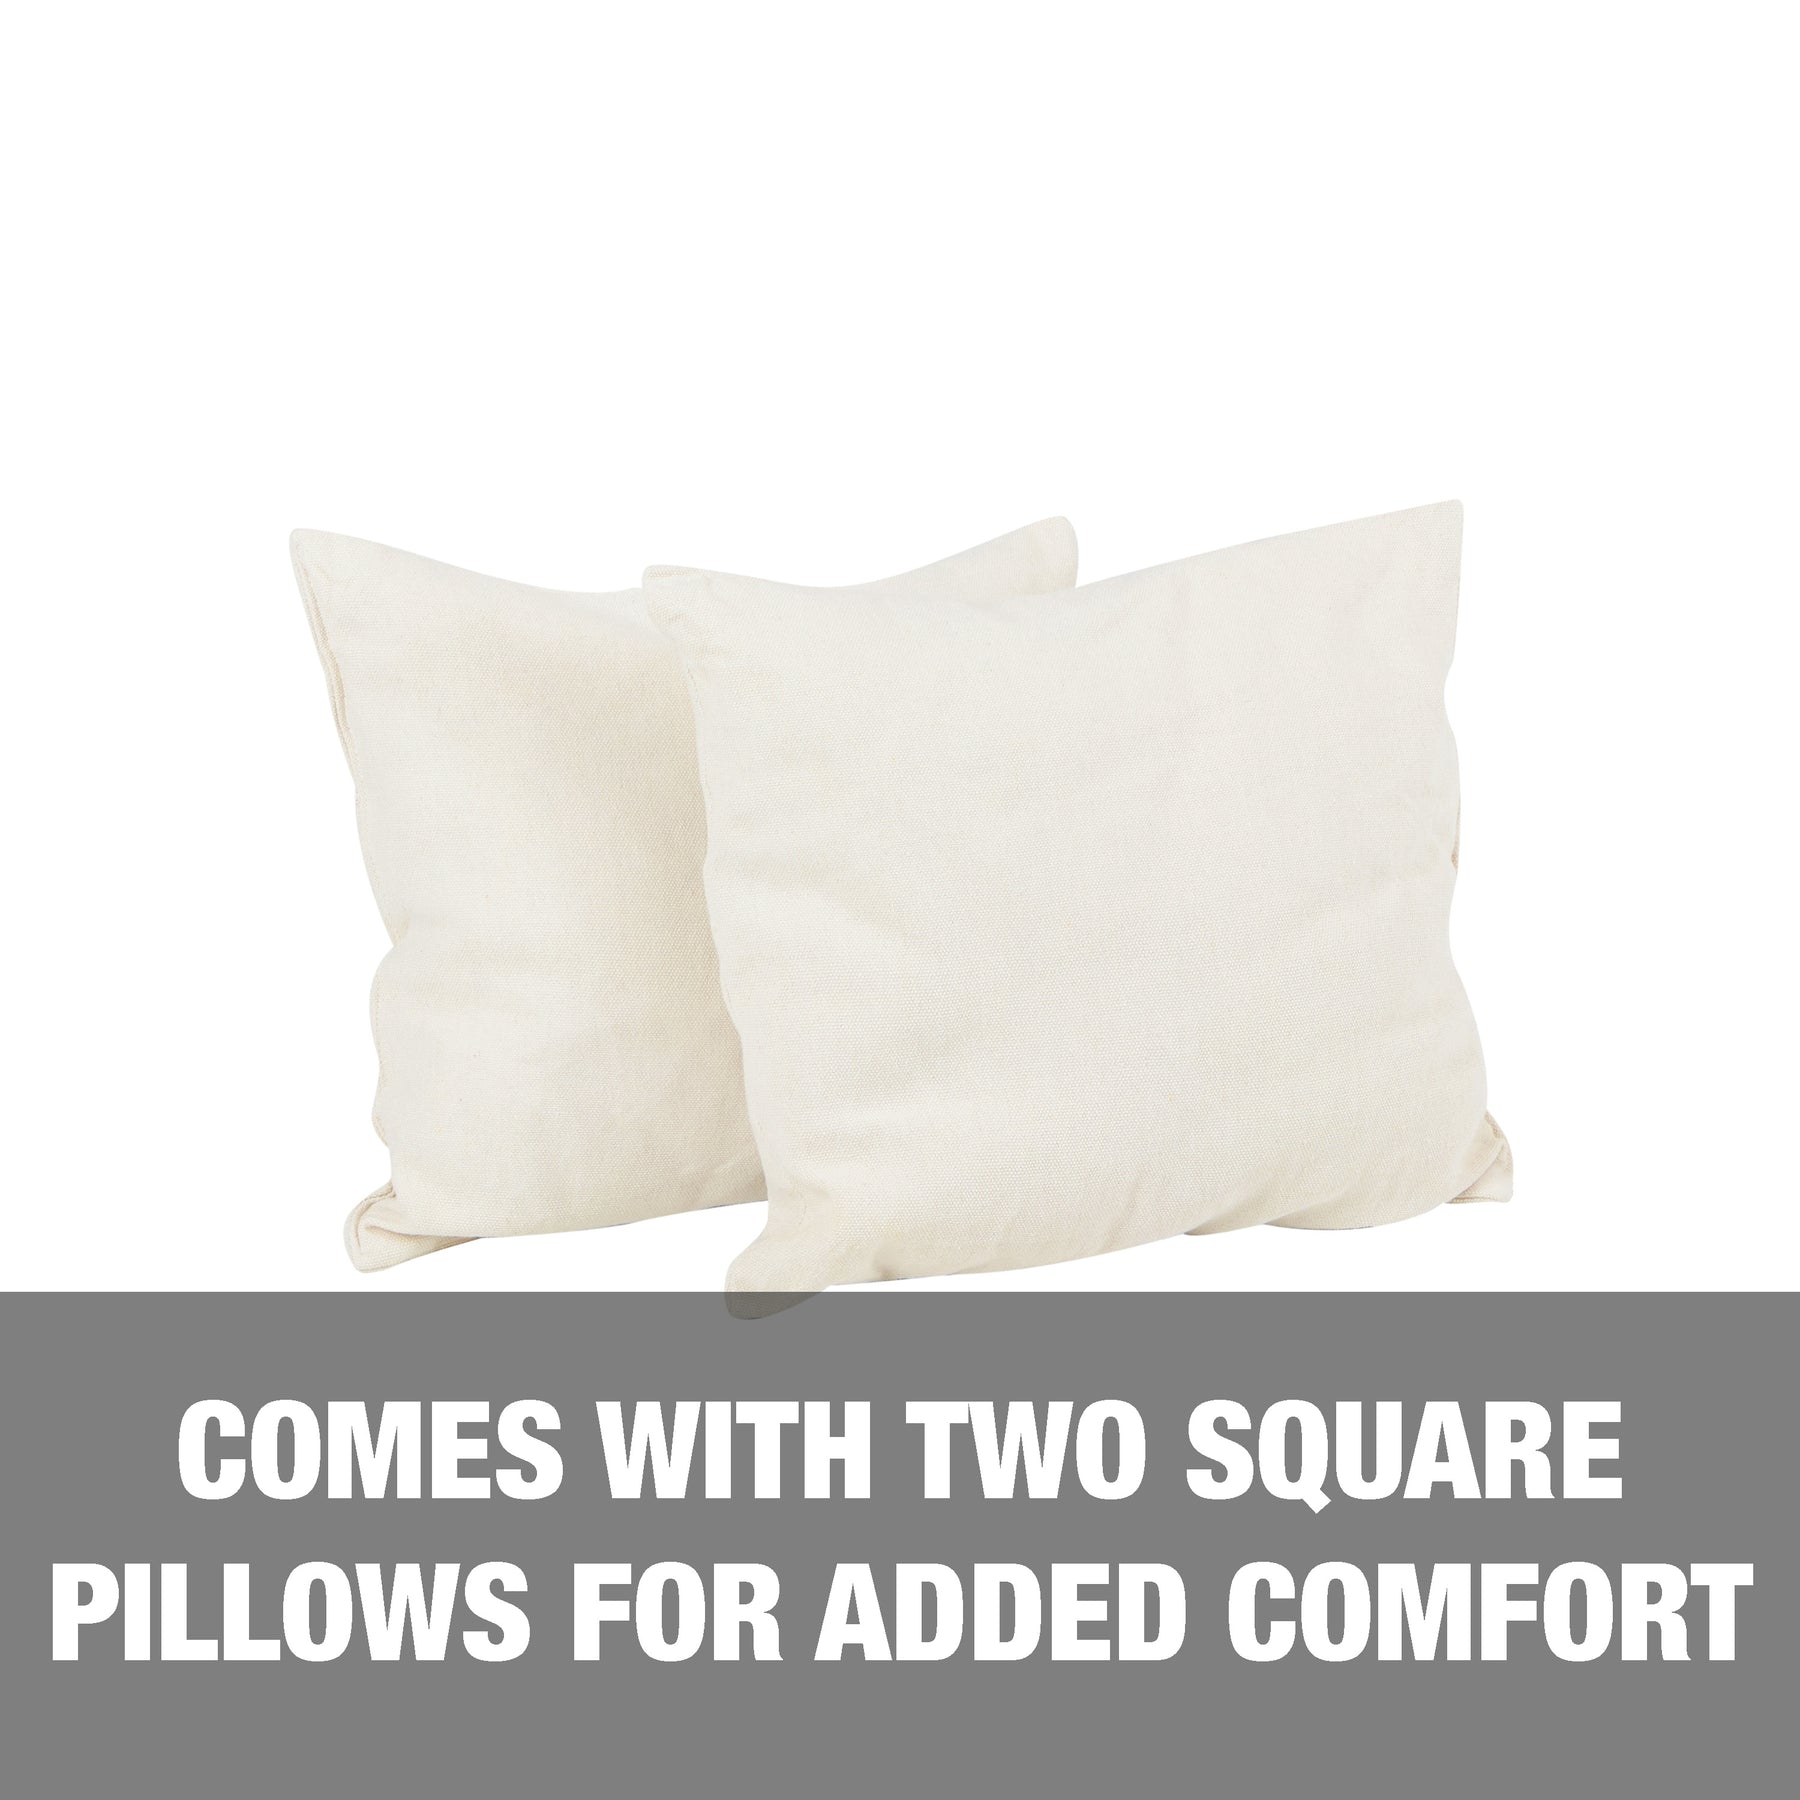 Comes with two square pillows for added comfort.